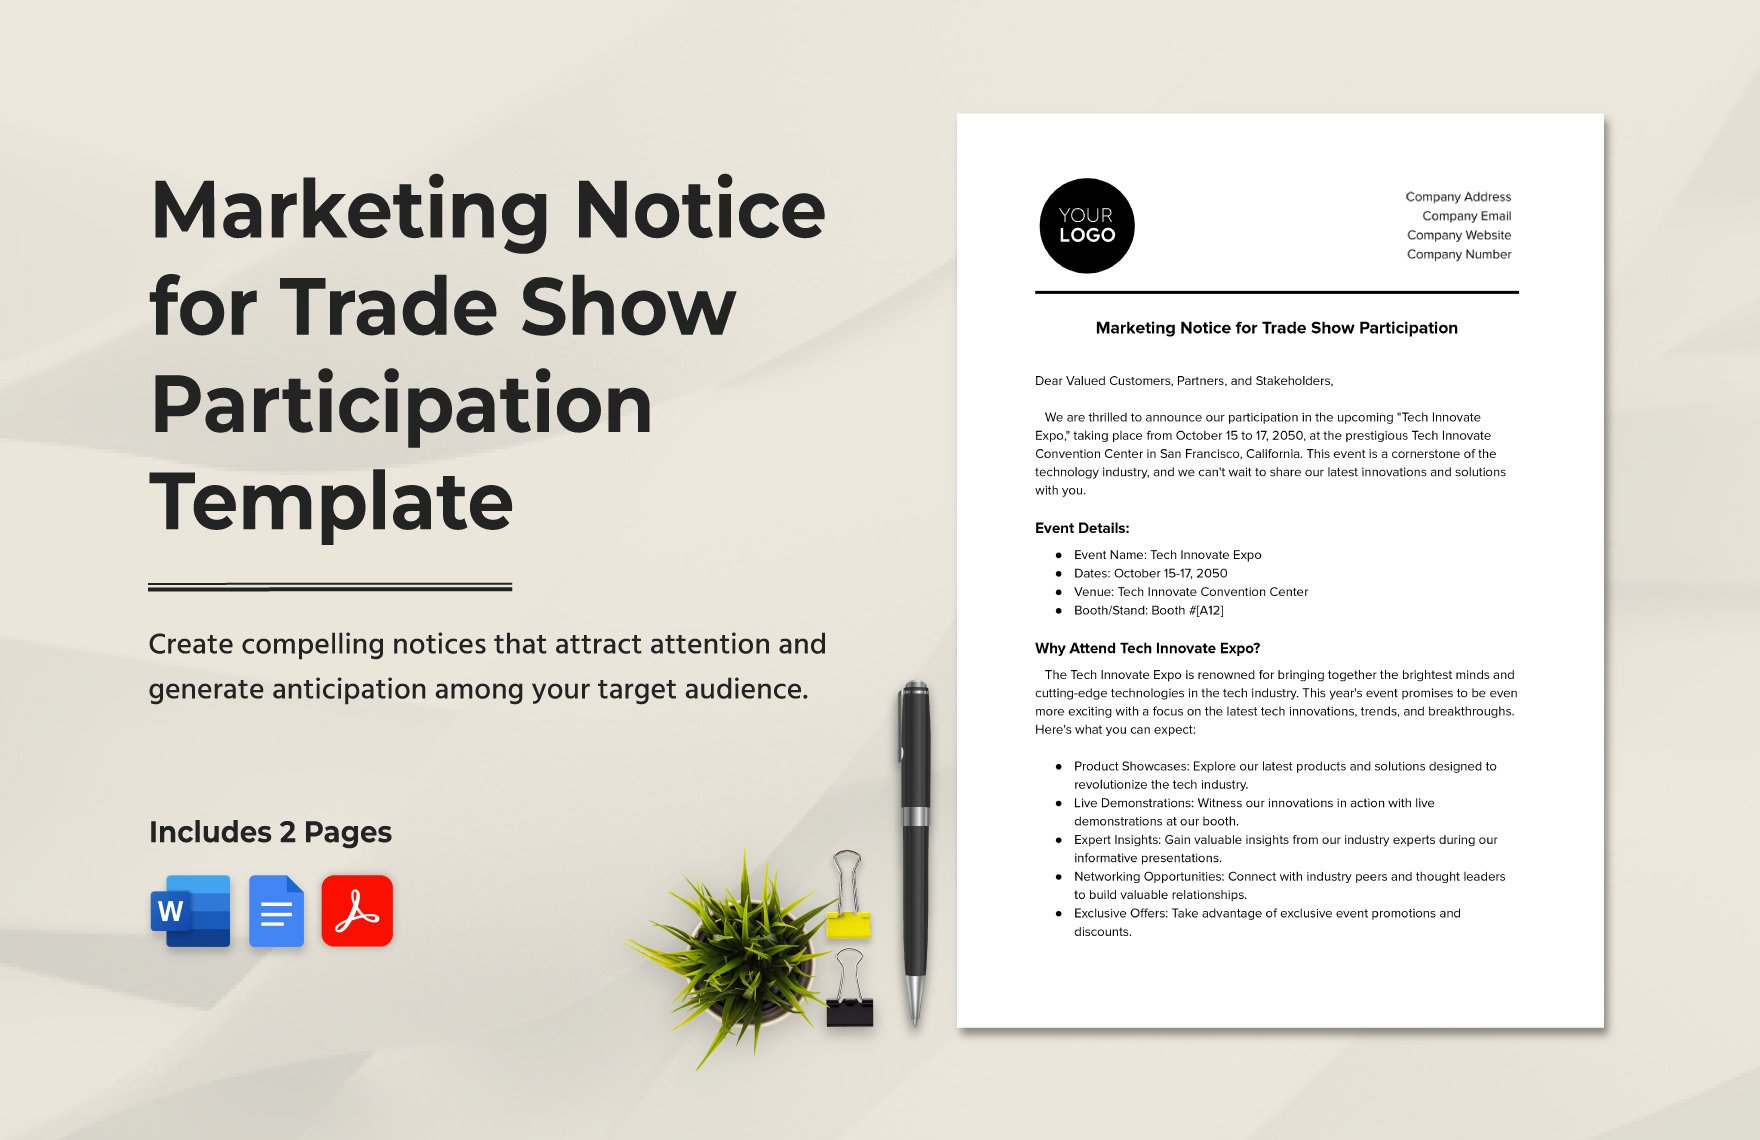 Marketing Notice for Trade Show Participation Template